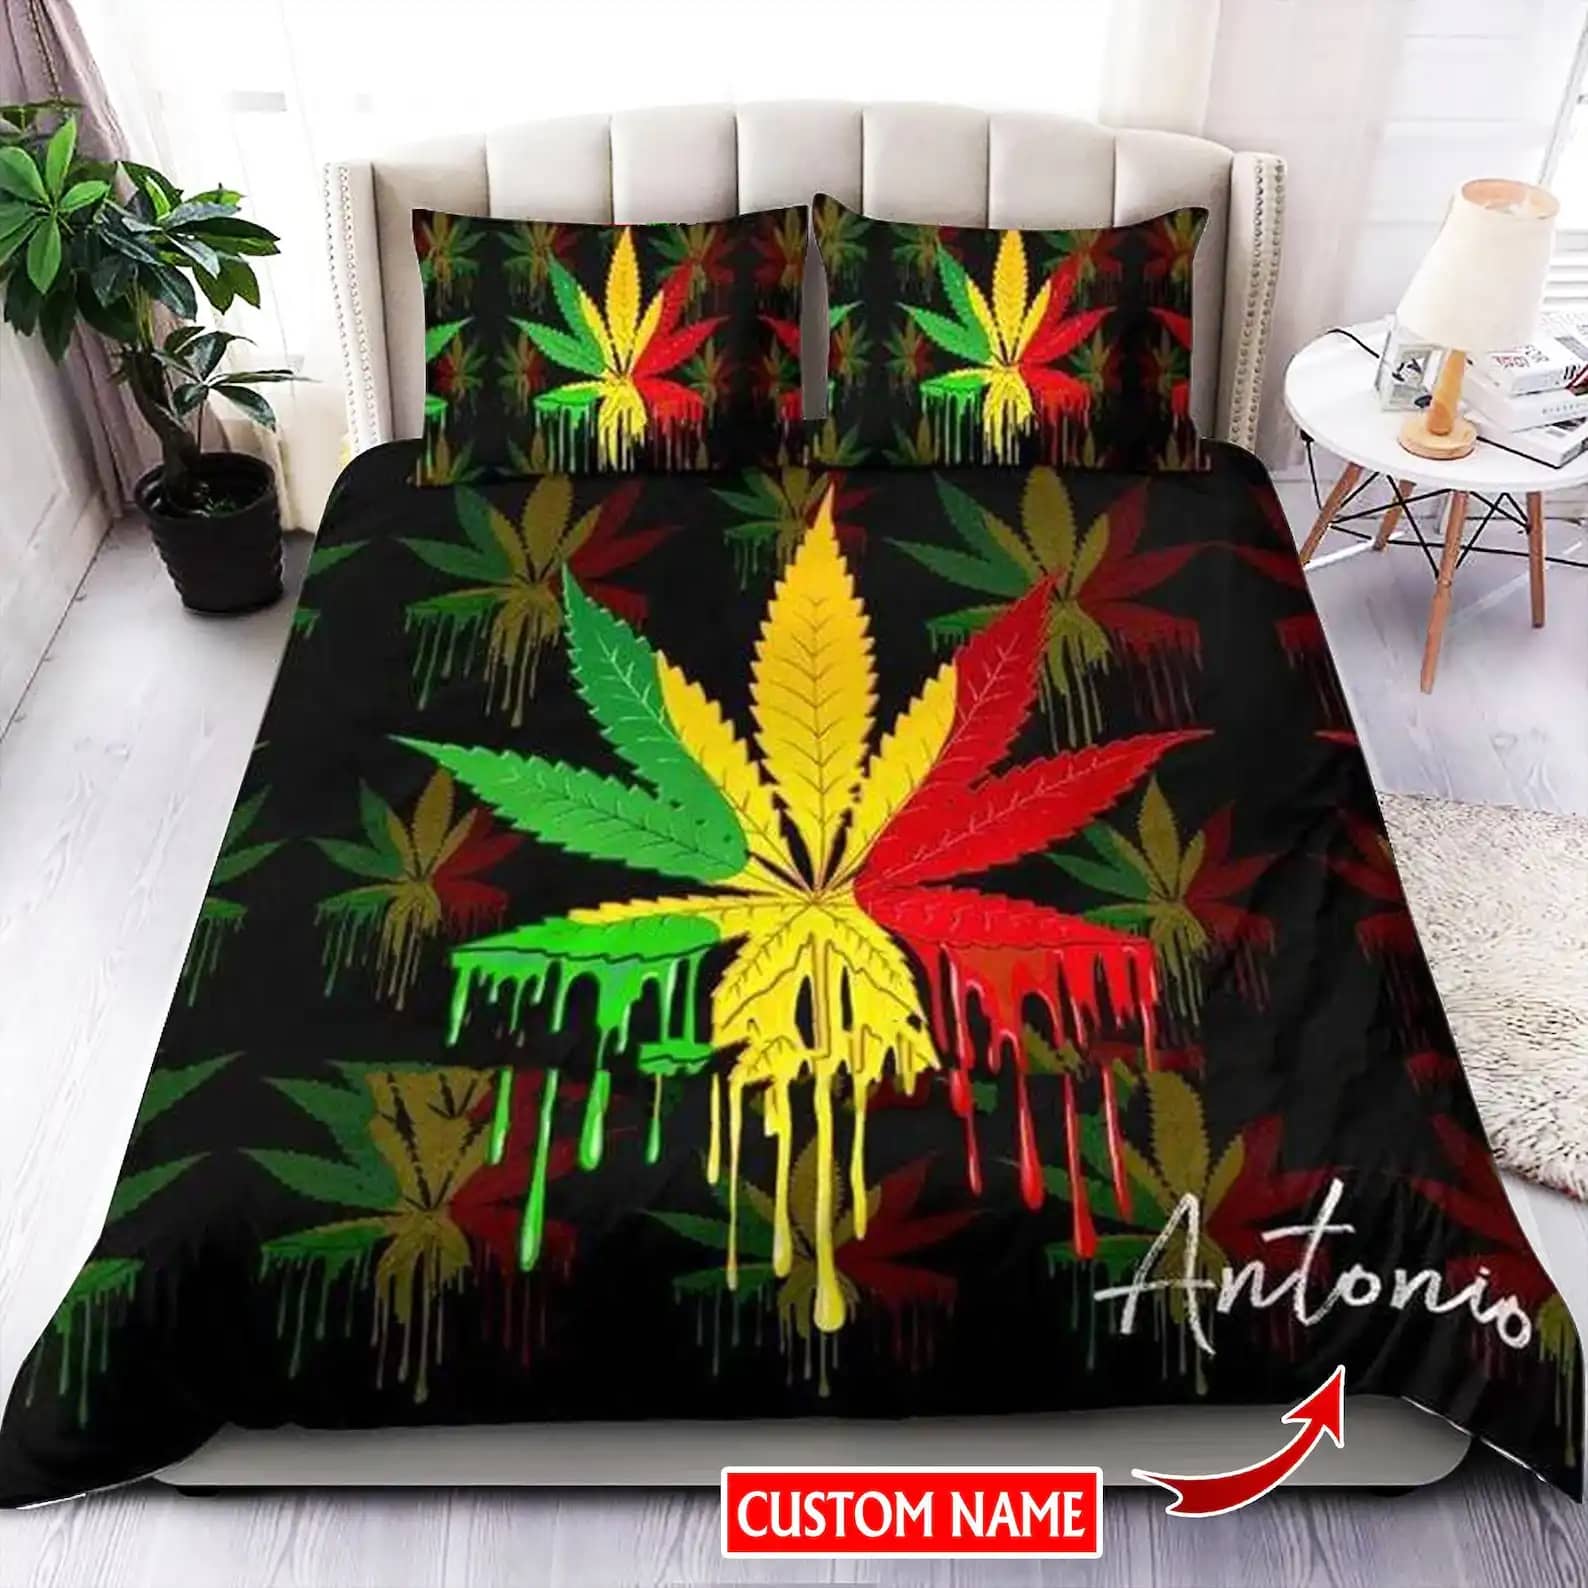 Personalized Cannabis Weed Pot Marijuana Quilt Bedding Sets